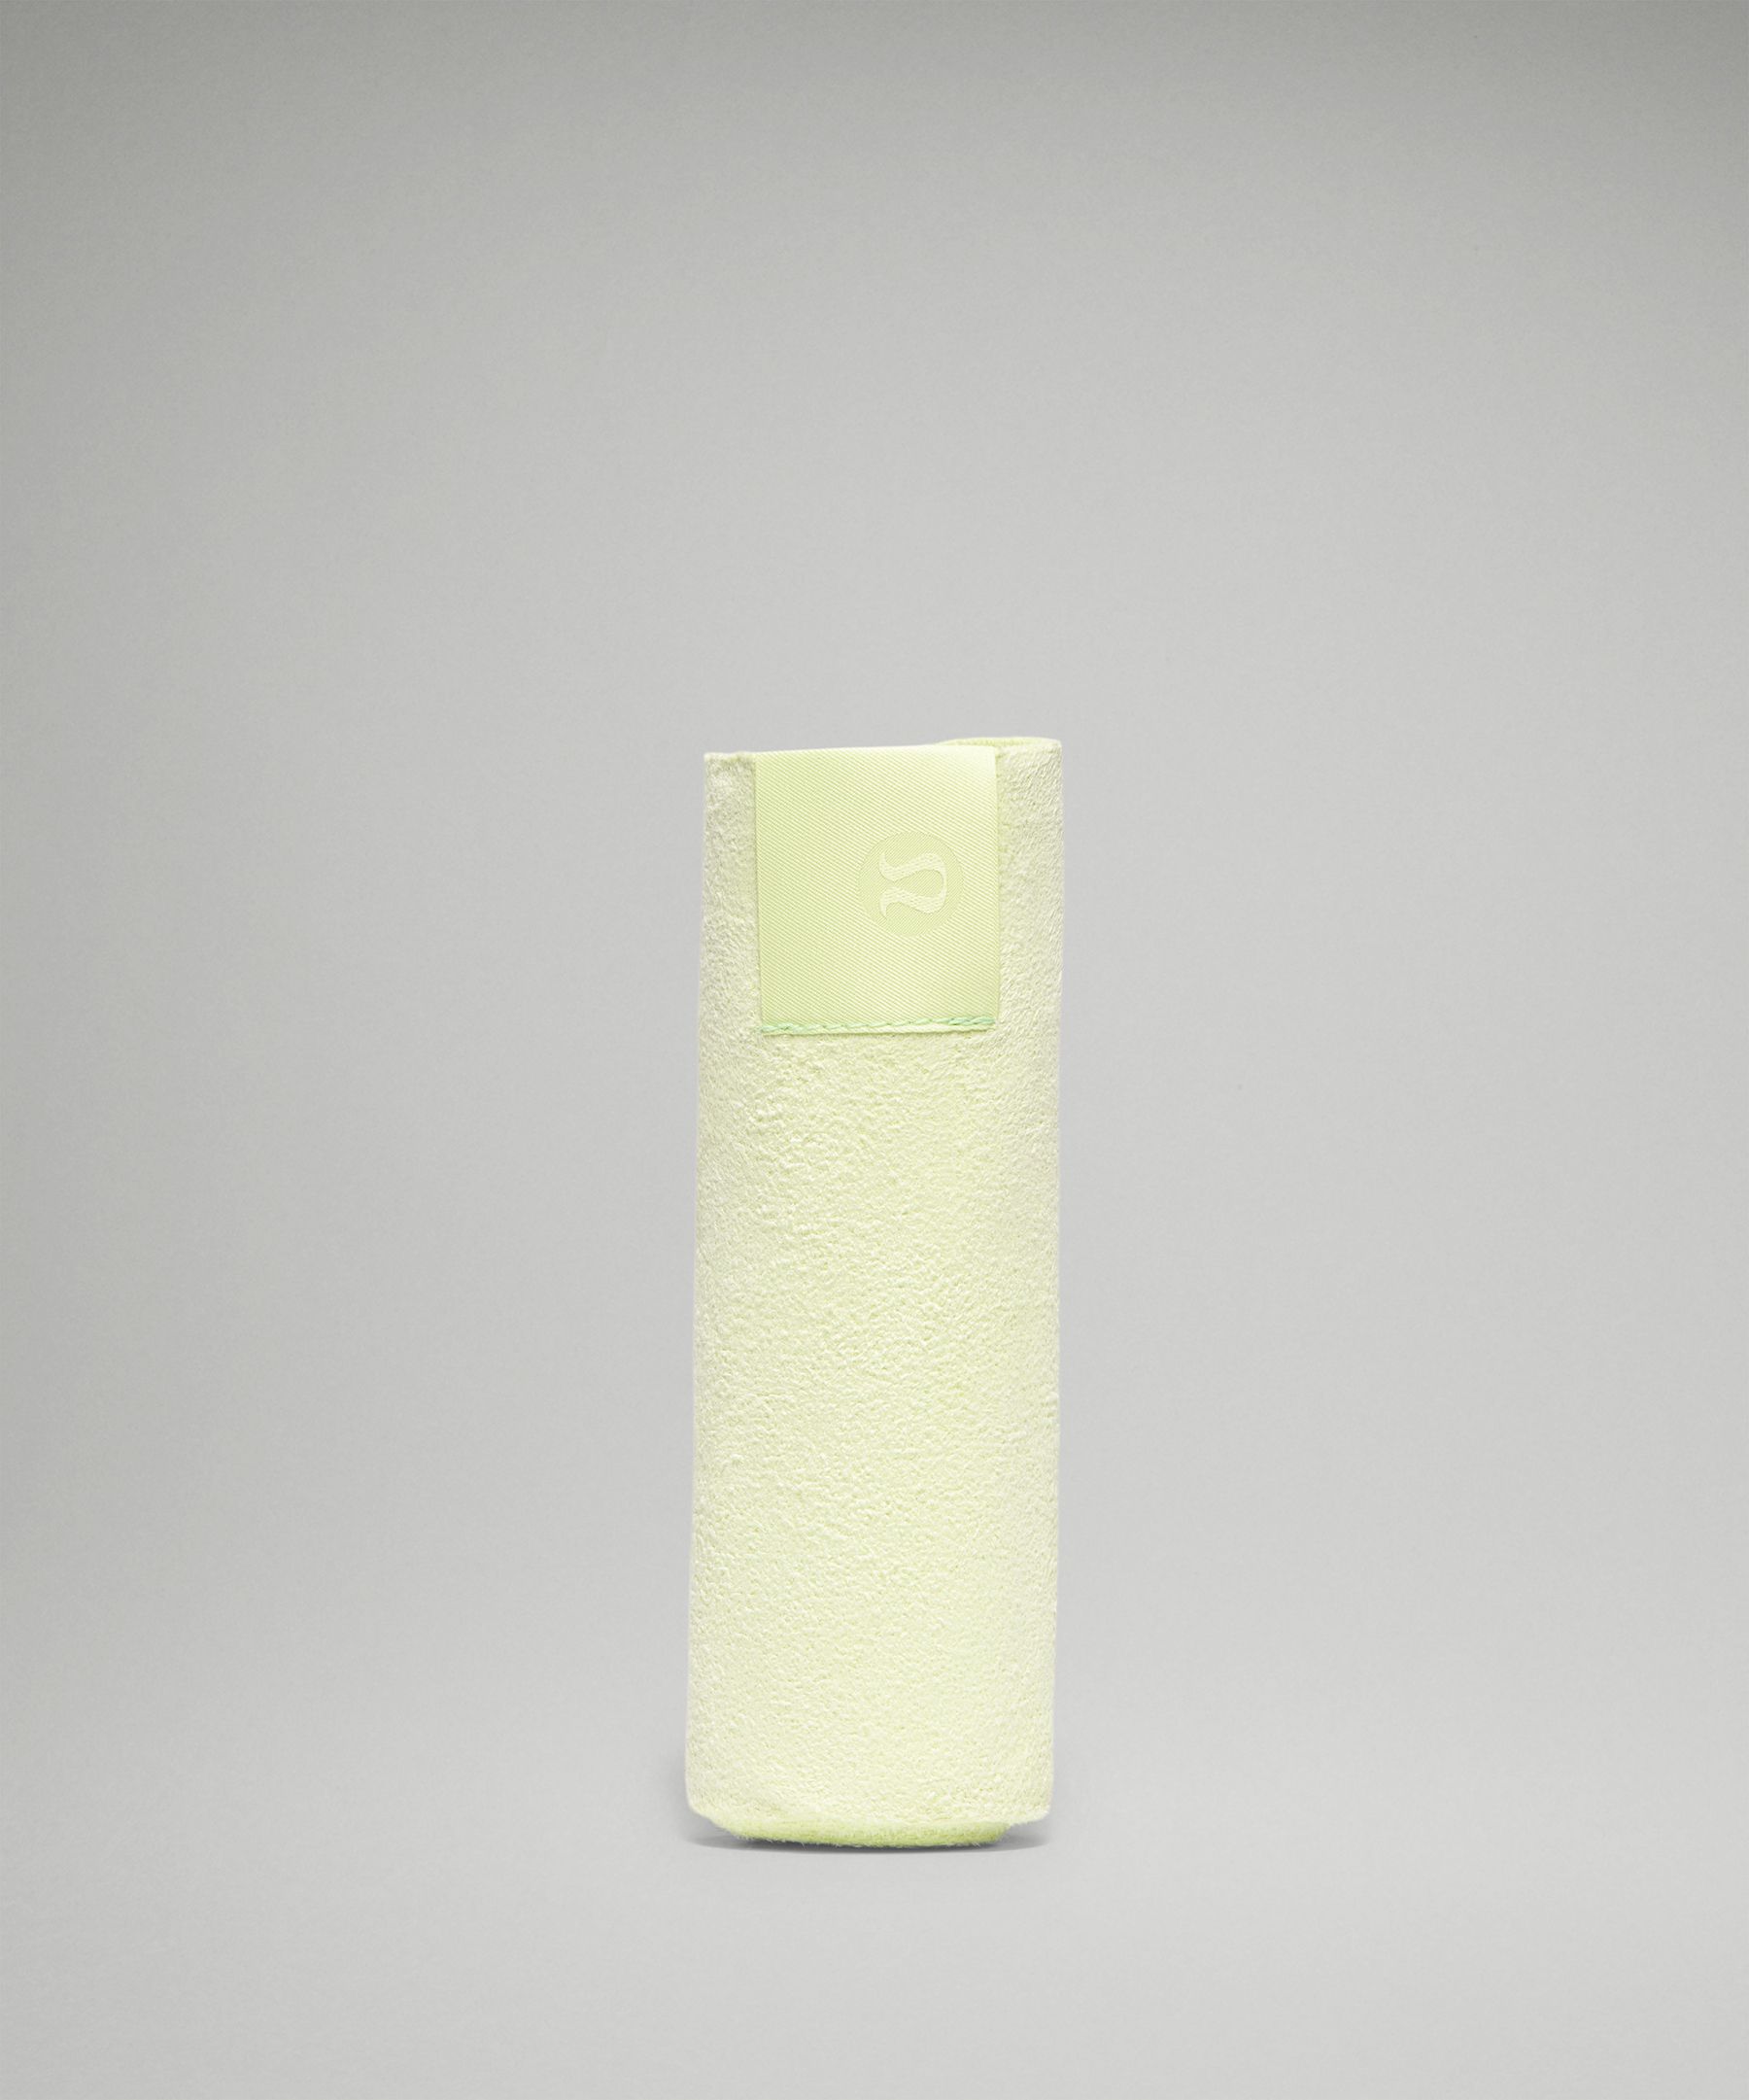 Lululemon The (small) Towel In Crispin Green